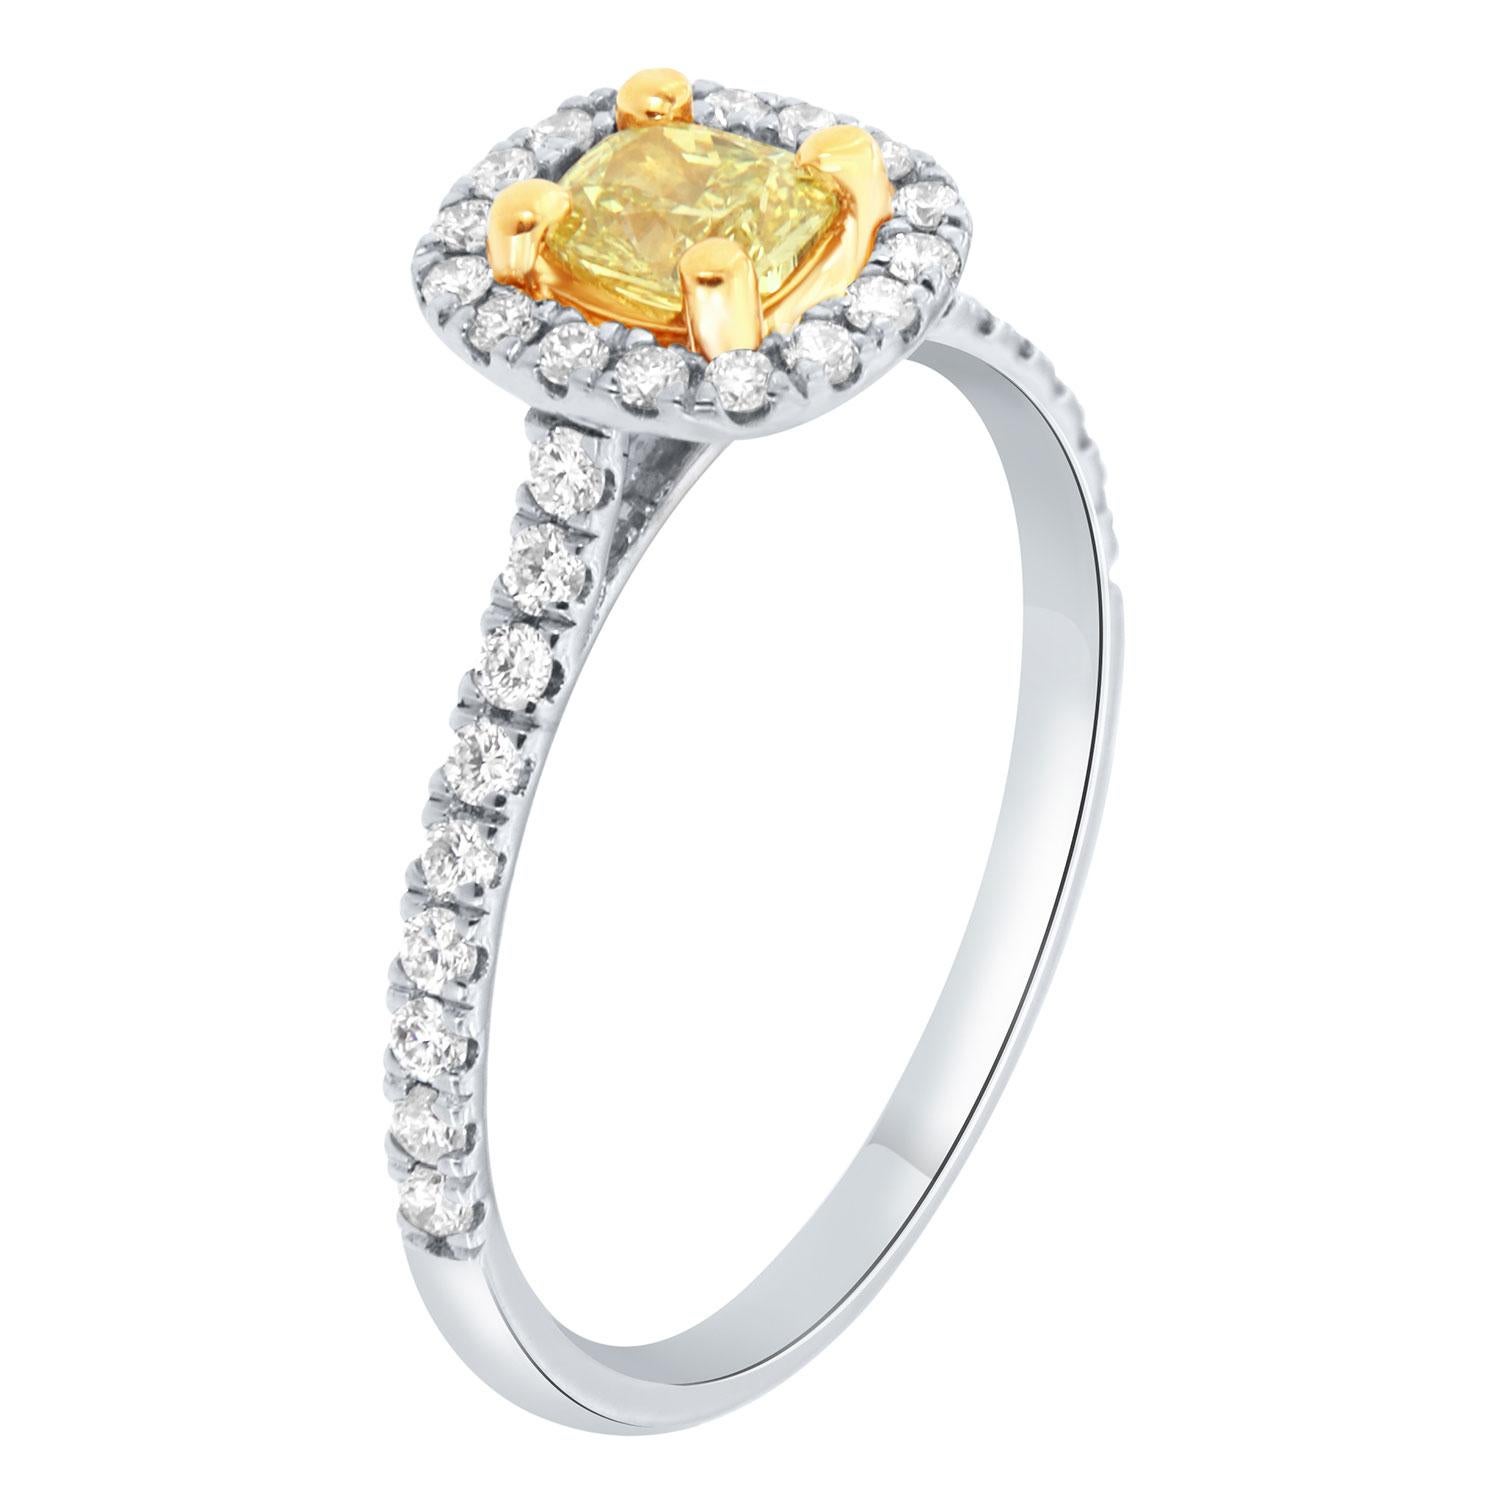 This 18K White and Yellow gold ring features a 0.35 - Carat Square Cushion Natural Yellow Diamond encircled by a halo of brilliant round diamonds on a one-row 1.6 mm wide band. The diamonds are Micro-Prong set on 50% of the band. The diamond's